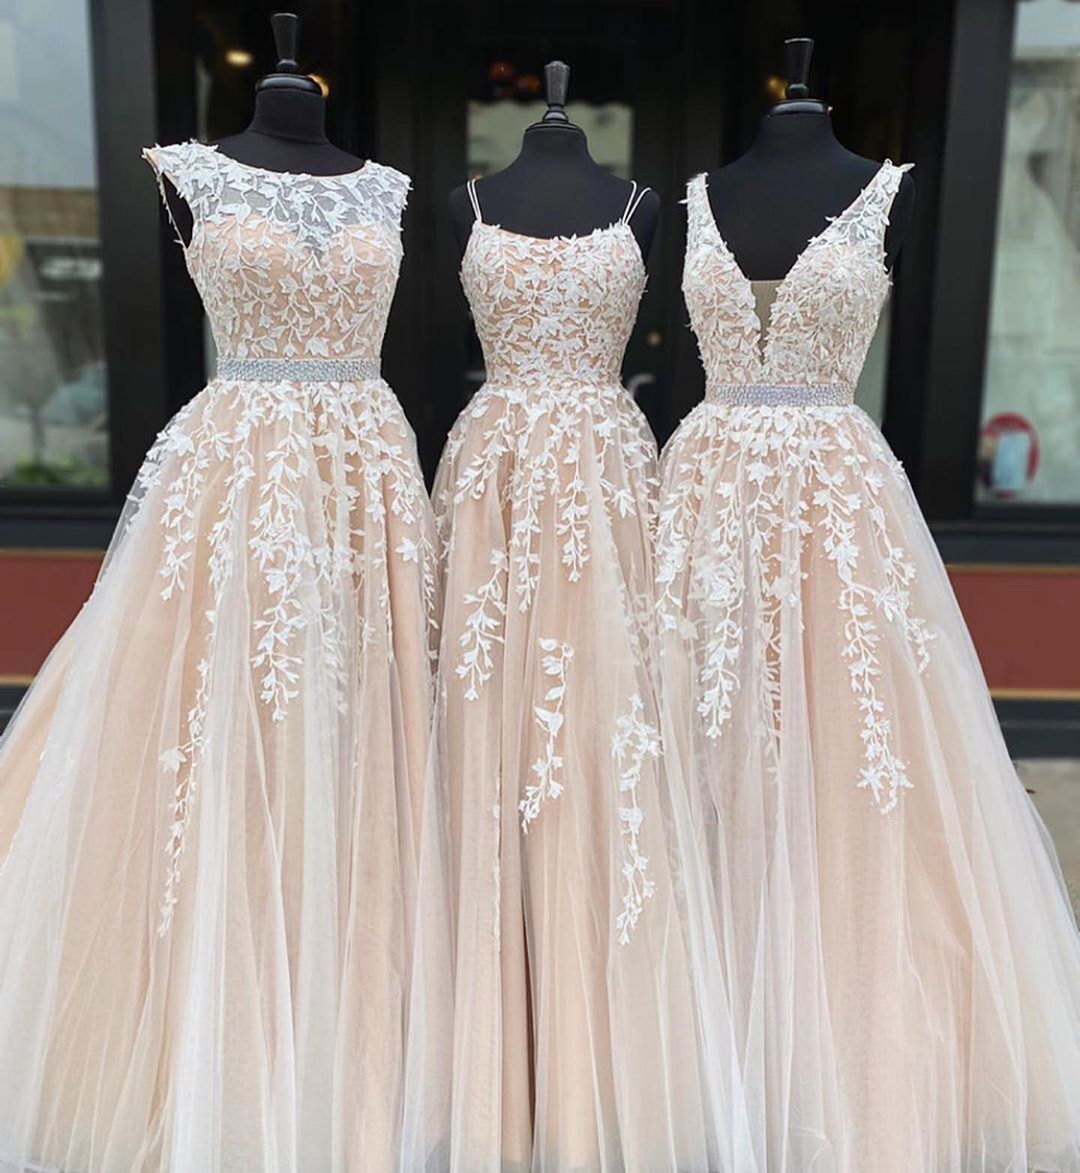 Champagne Prom Dress, Mixed Styles Prom Dress, Lace Applique Prom Dresses, Elegant Prom Dress, Pageant Dresses For Women, Beaded Prom Dresses,